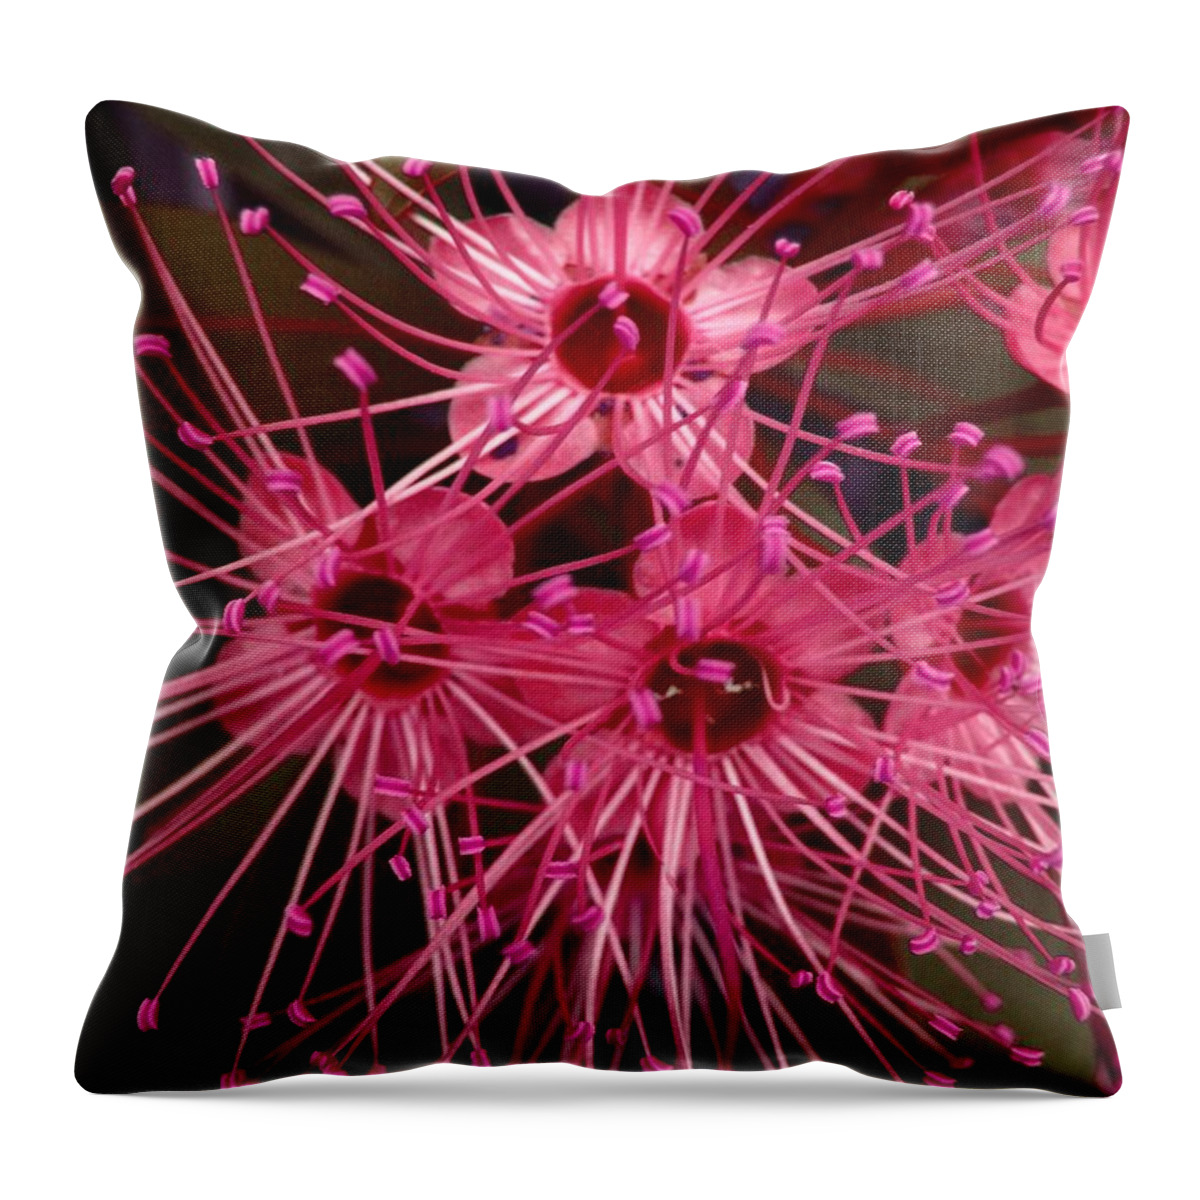 Flower Throw Pillow featuring the photograph Stars by Michelle Meenawong